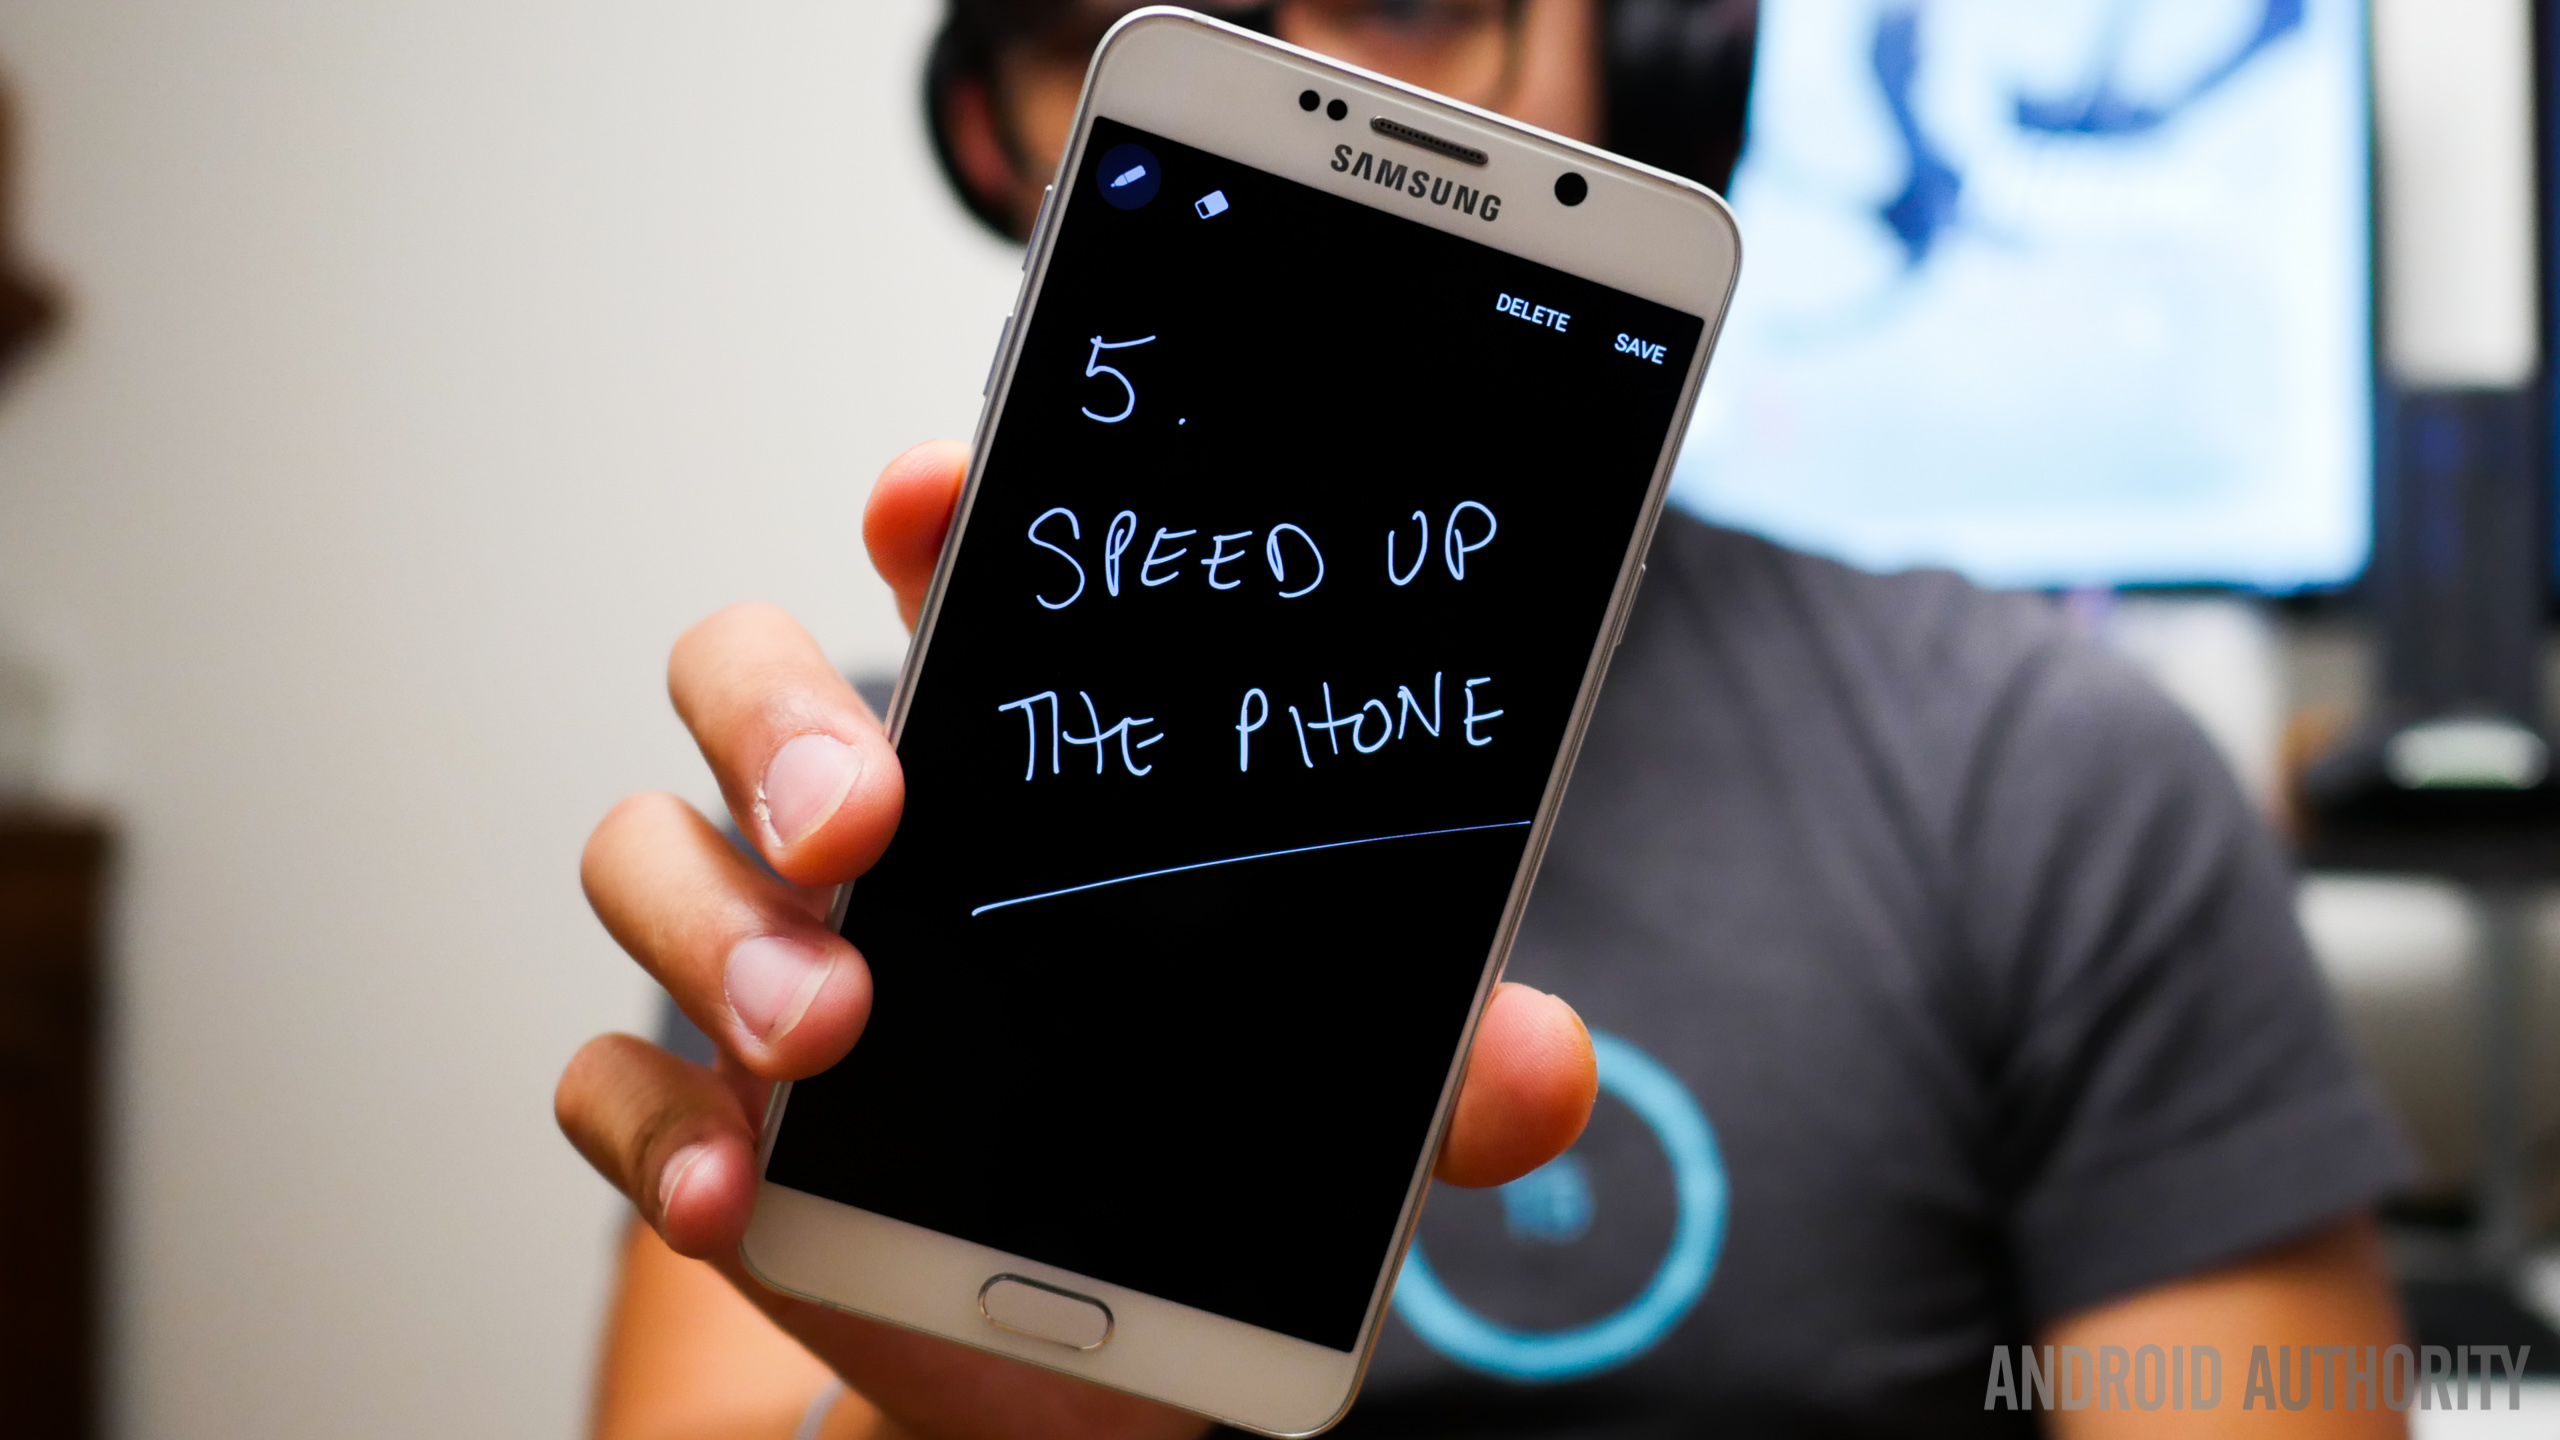 samsung galaxy note 5 5 tips and tricks aa (27 of 30)